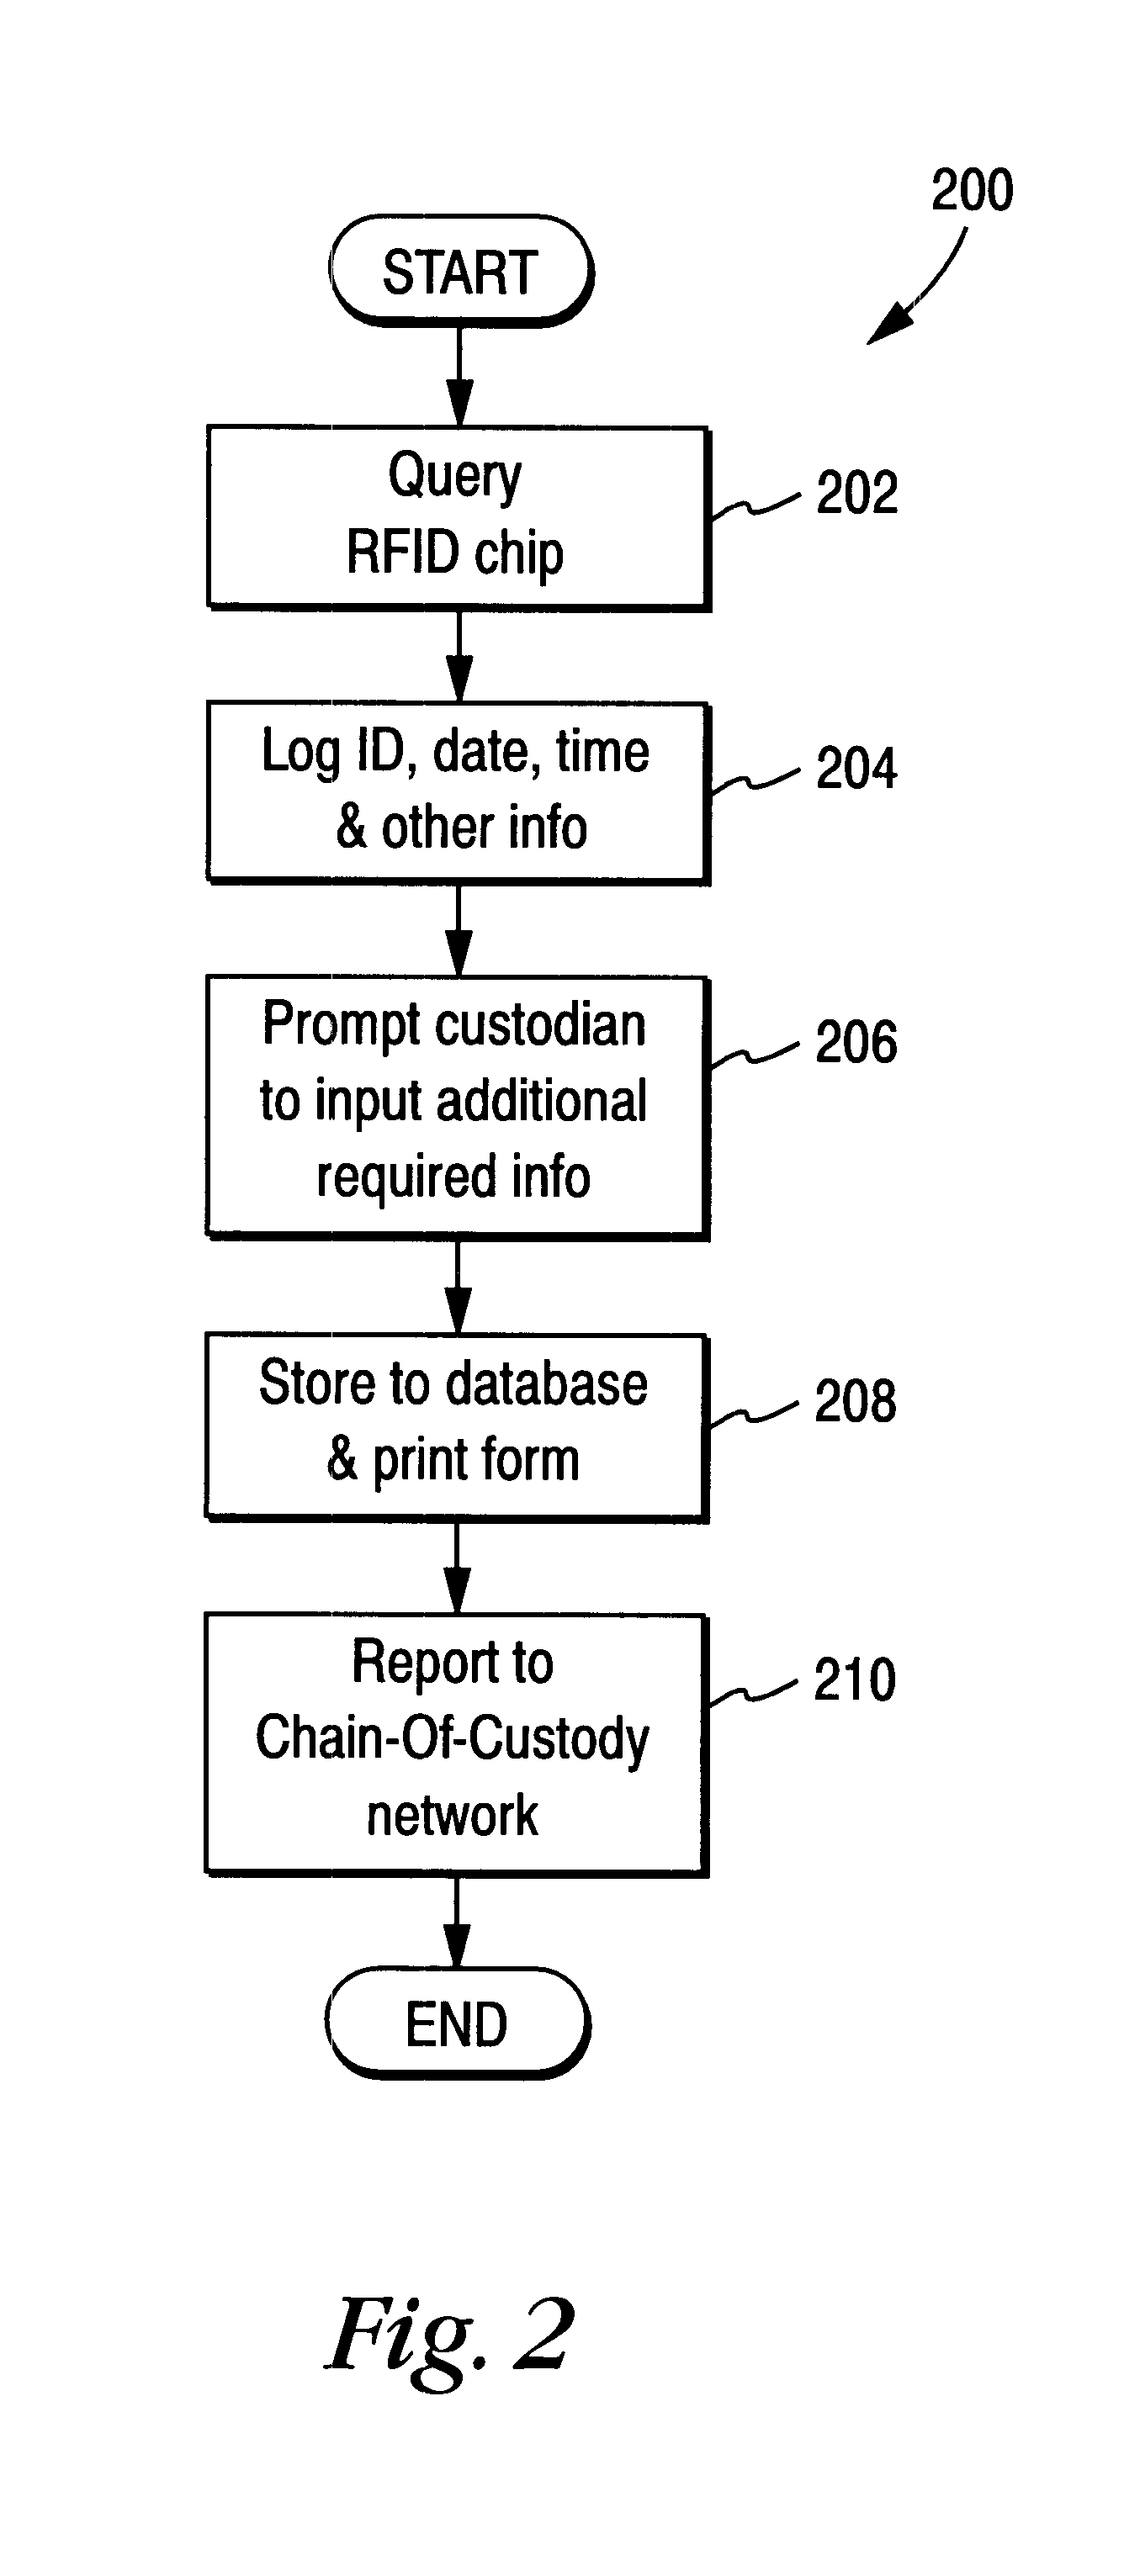 Chain of custody business form with automated wireless data logging feature